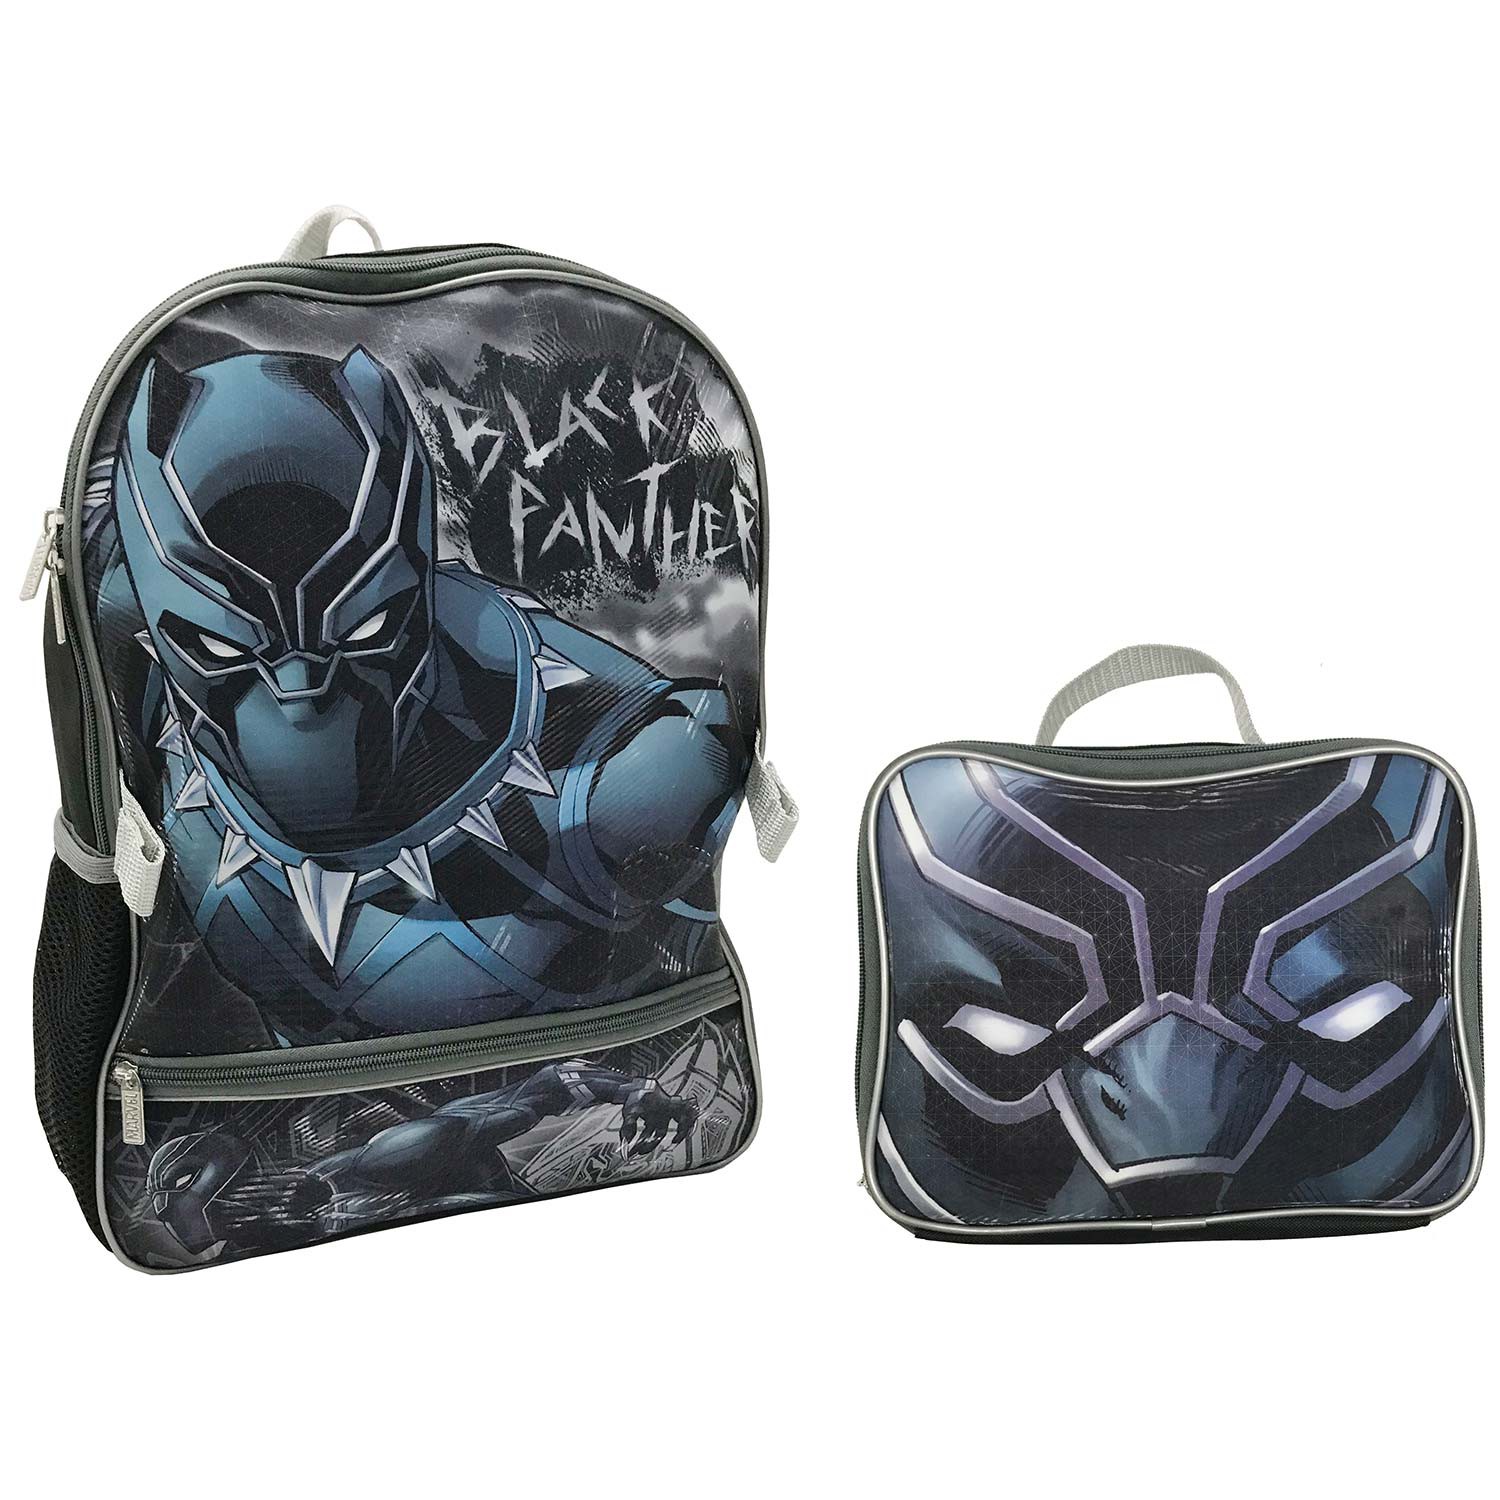 Black Panther Backpack and Lunch Kit